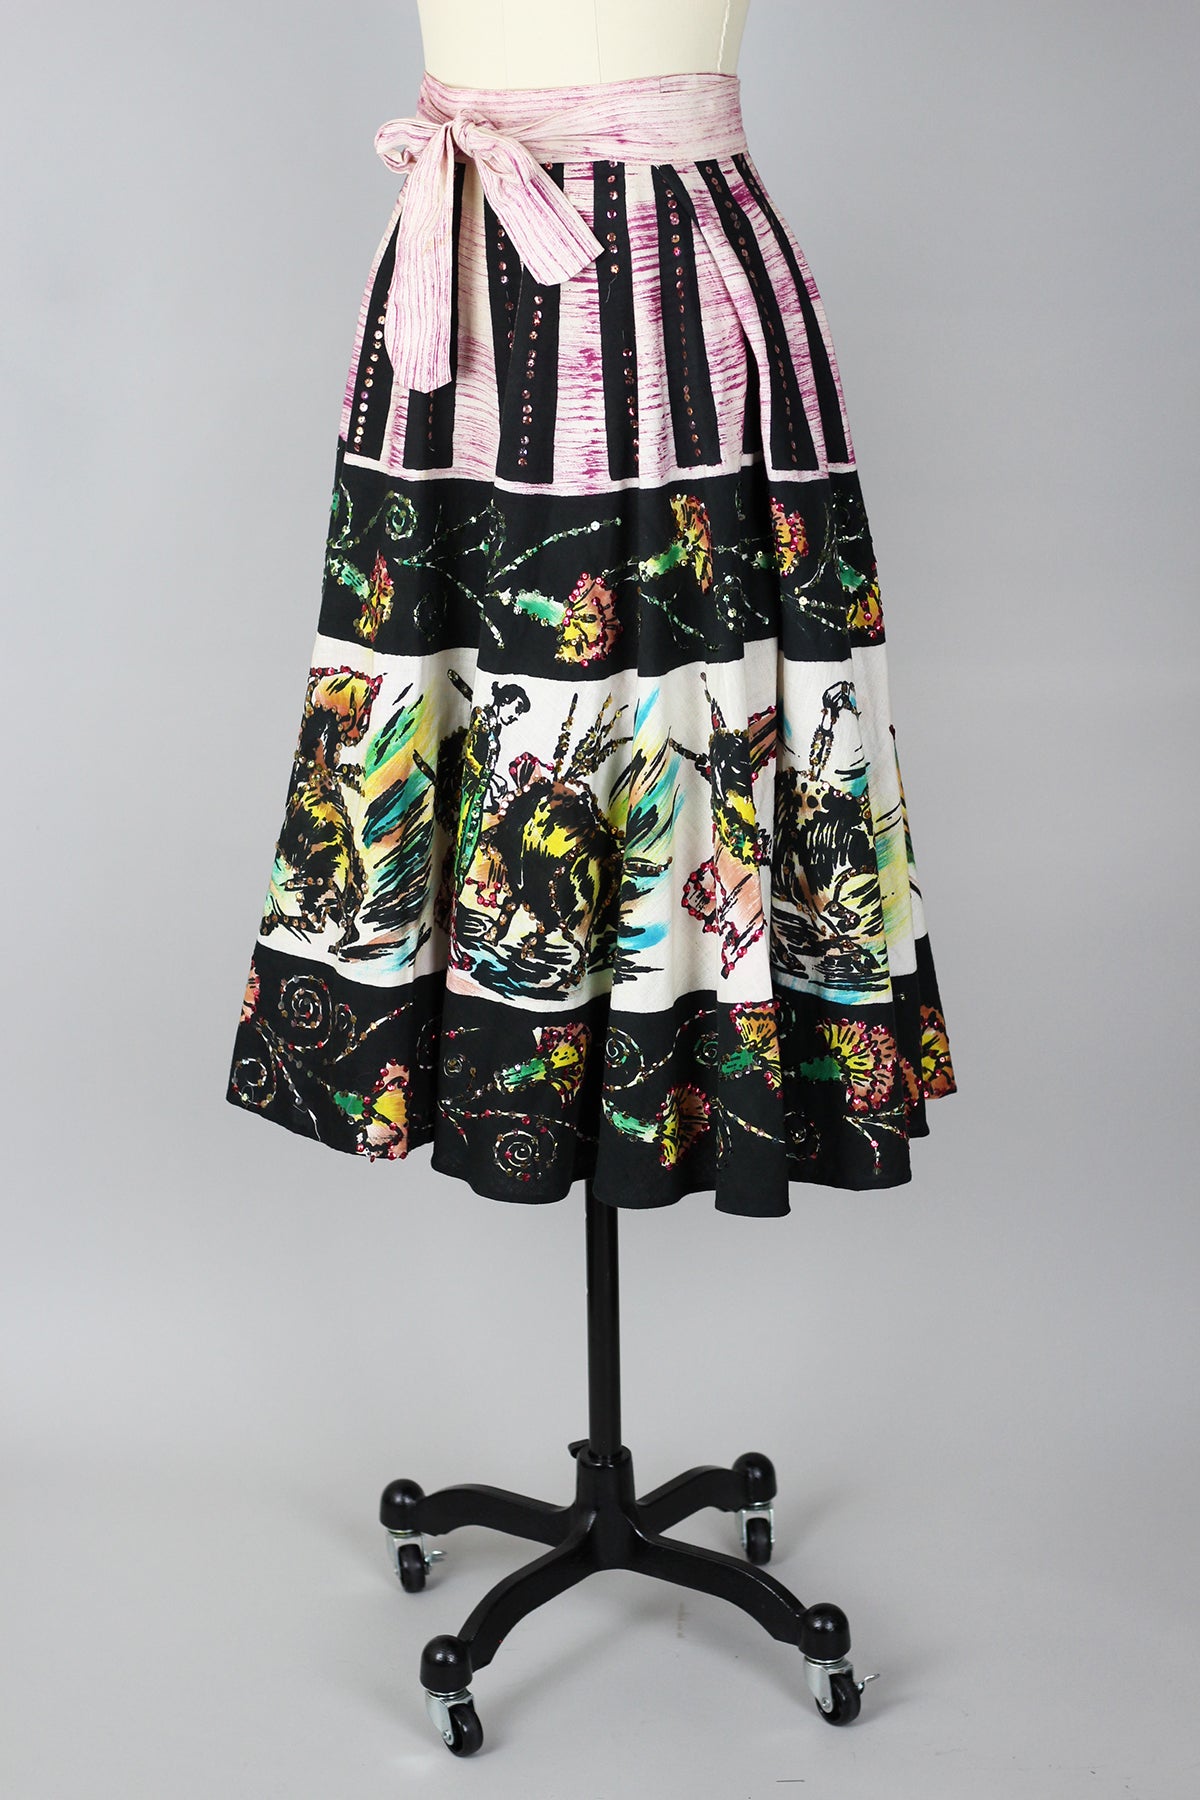 Rare 1940s-1950s Mexican Circle Skirt with Bull Fighters and Sequins